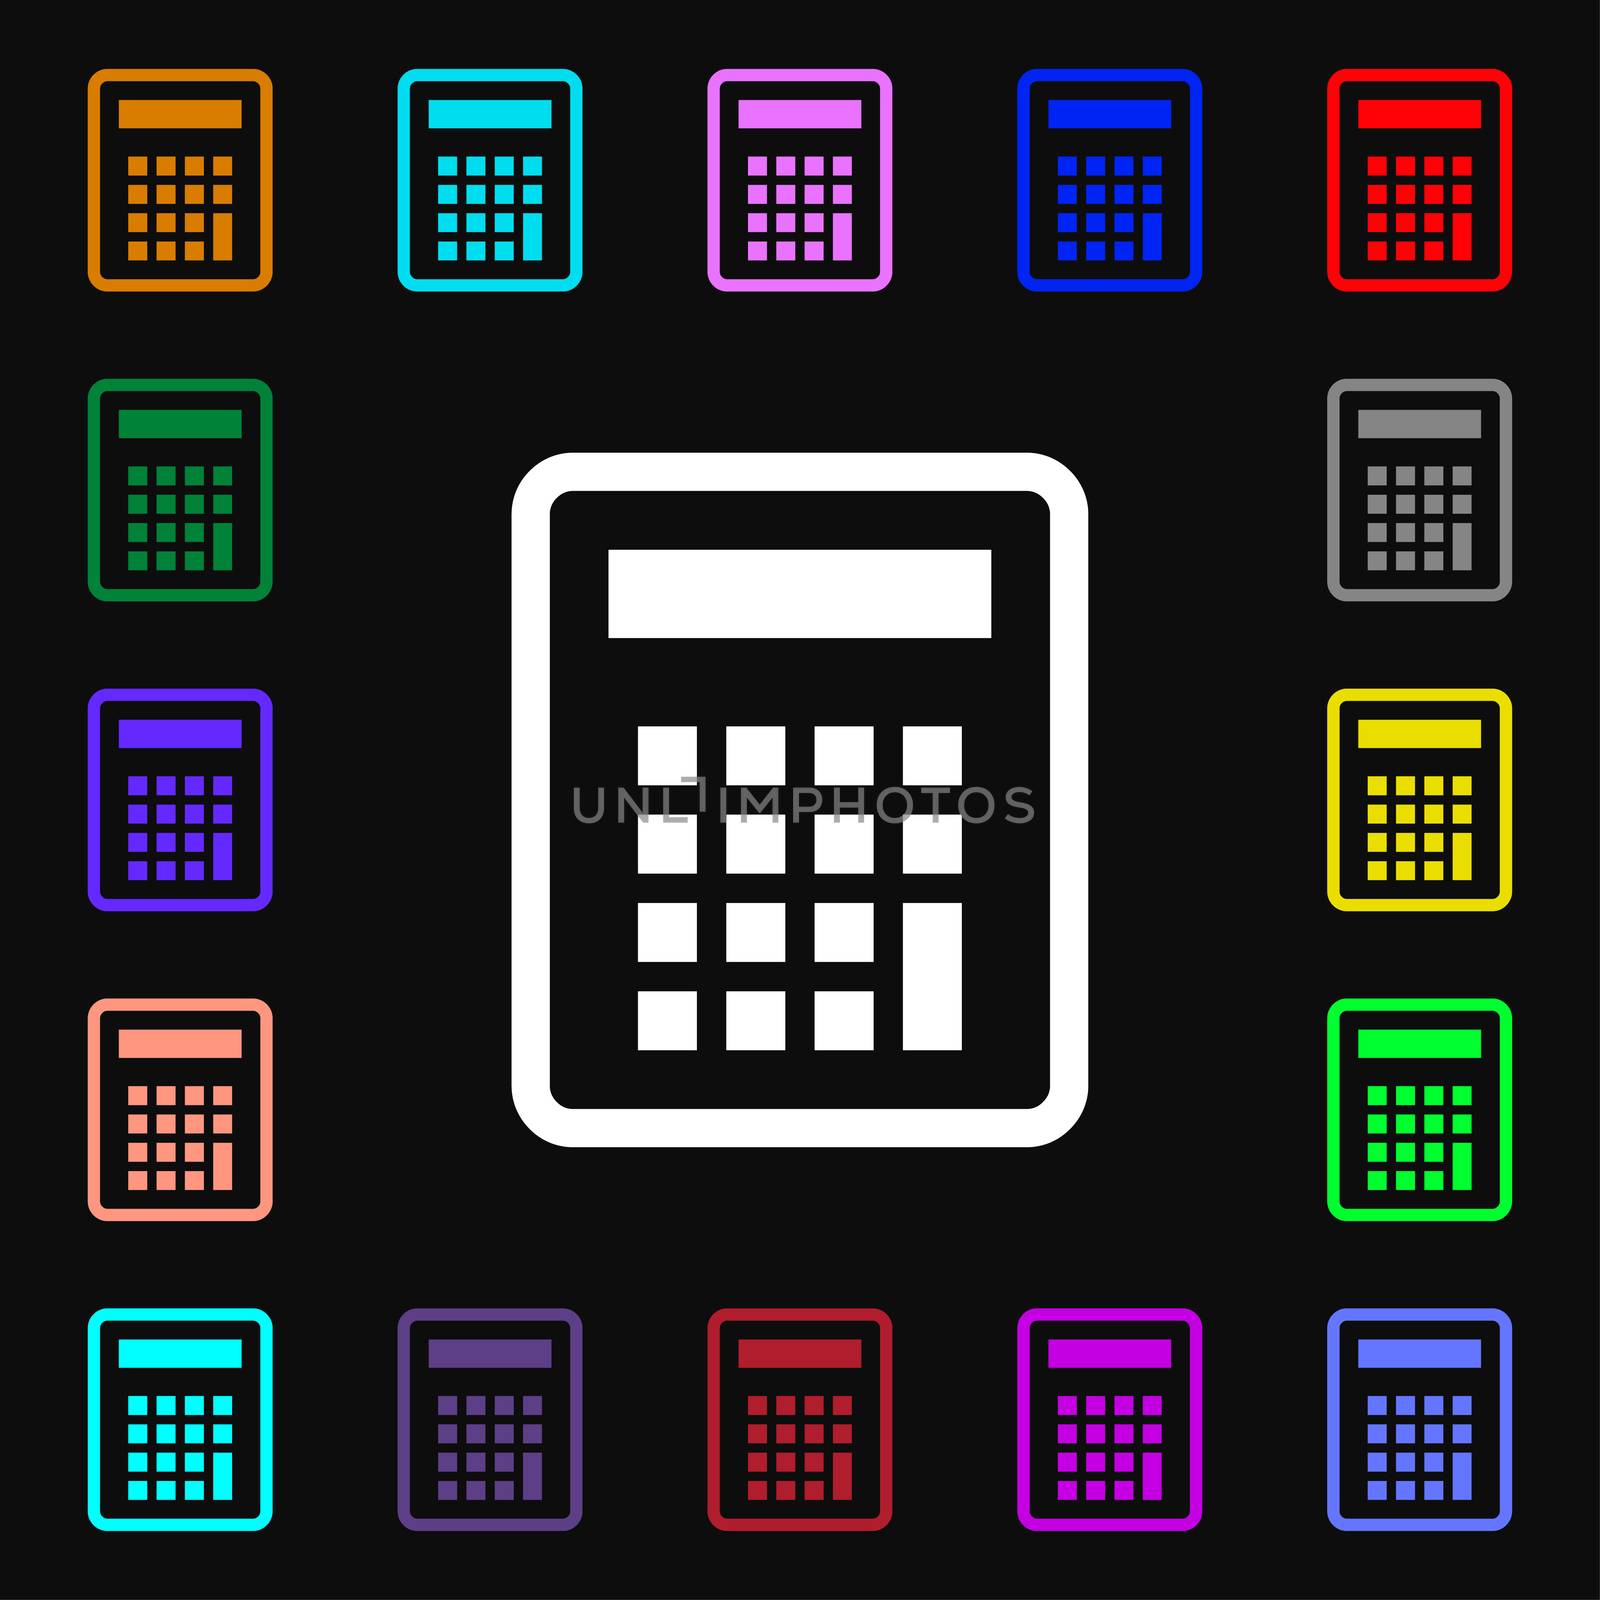 Calculator icon sign. Lots of colorful symbols for your design. illustration